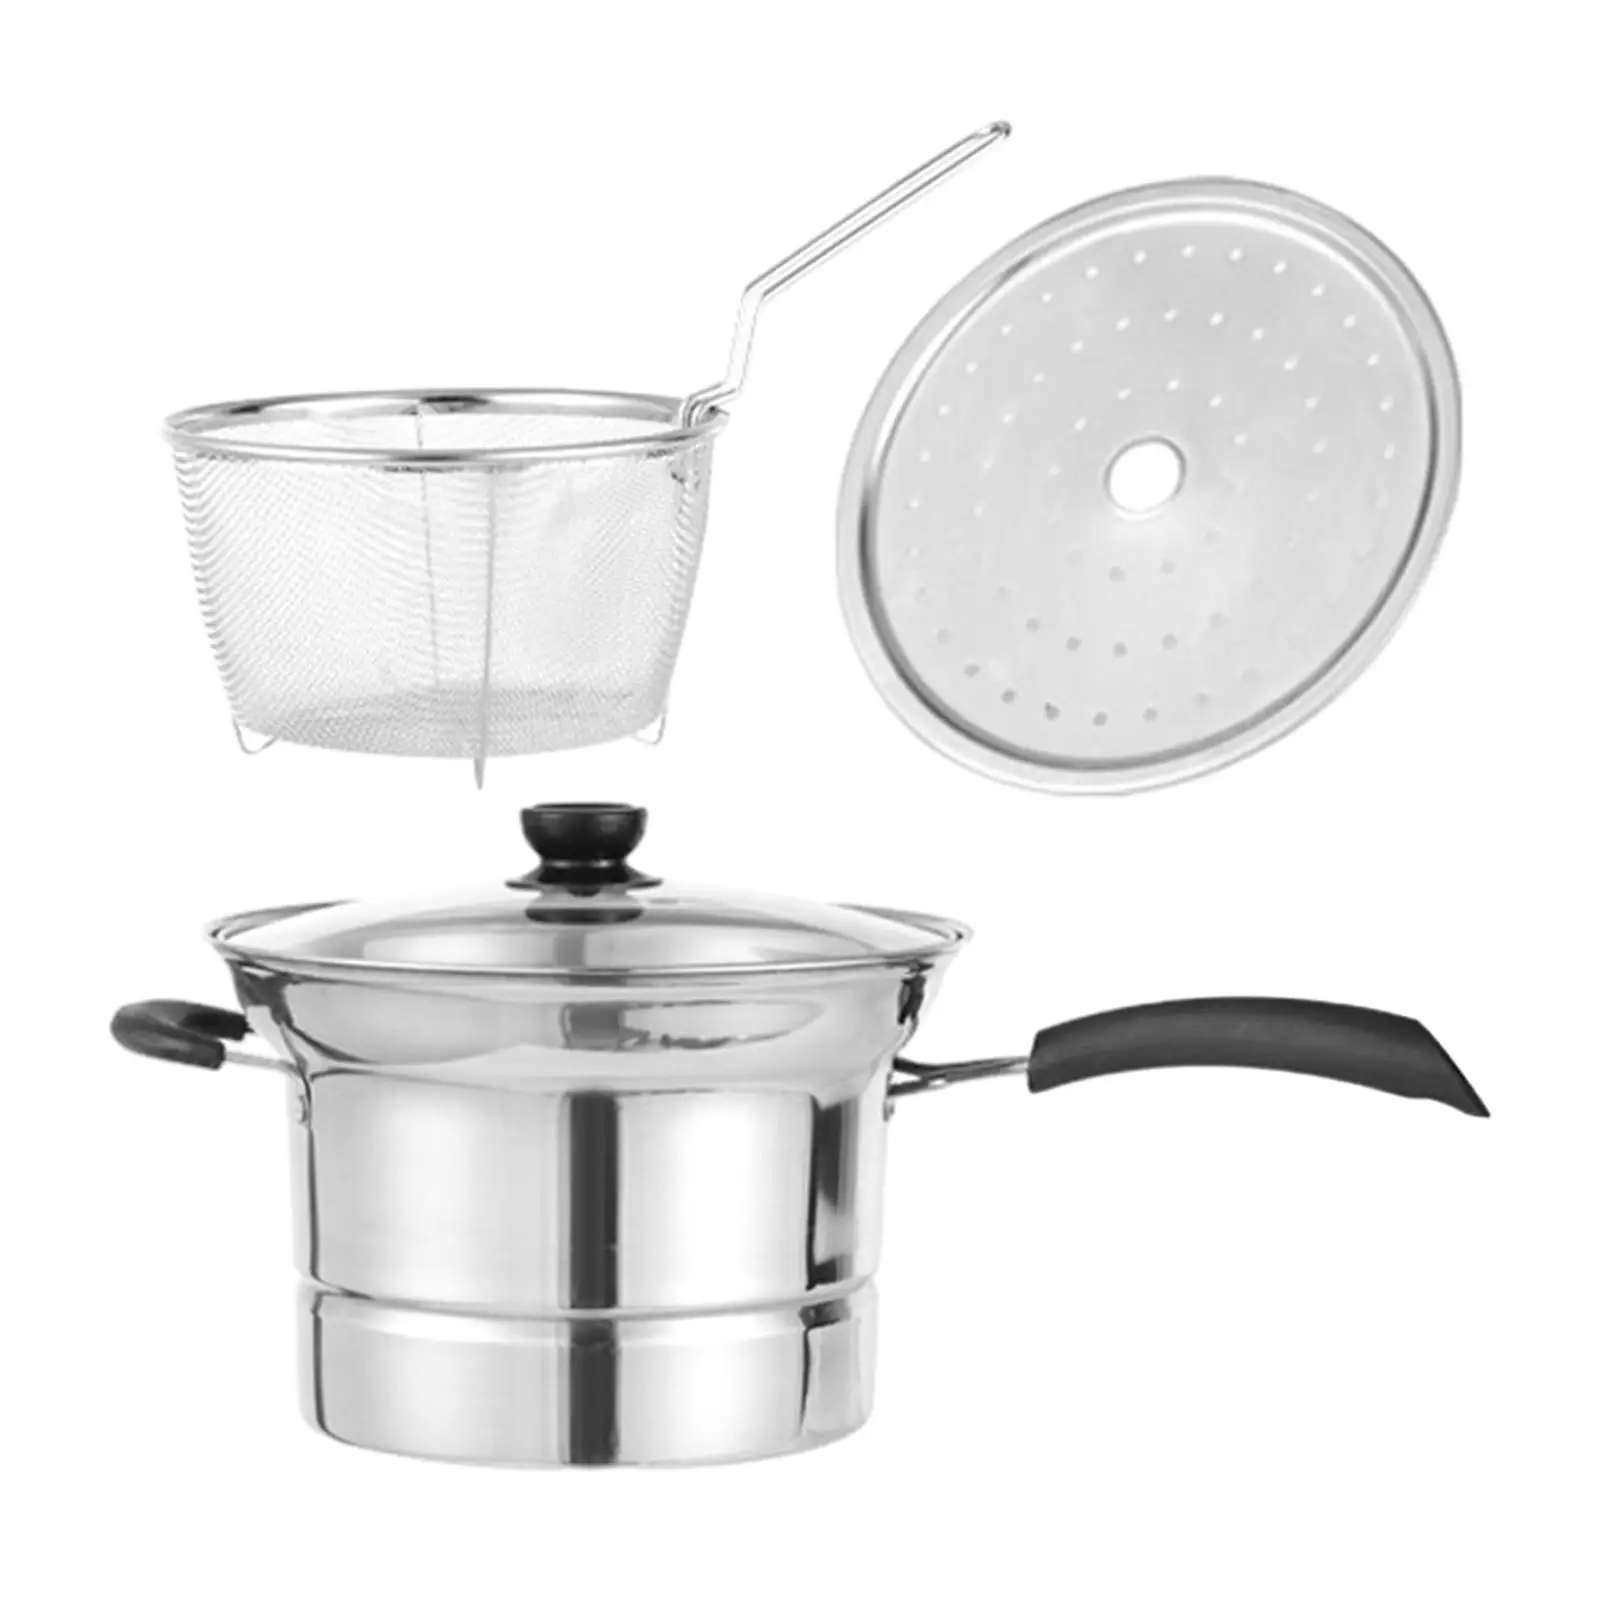 Deep Fryer Pot Soup Pot Steaming Boiling Pot Kitchenware Cooking Tool Cooking Pot for Camping Party Home Restaurant Dining Room